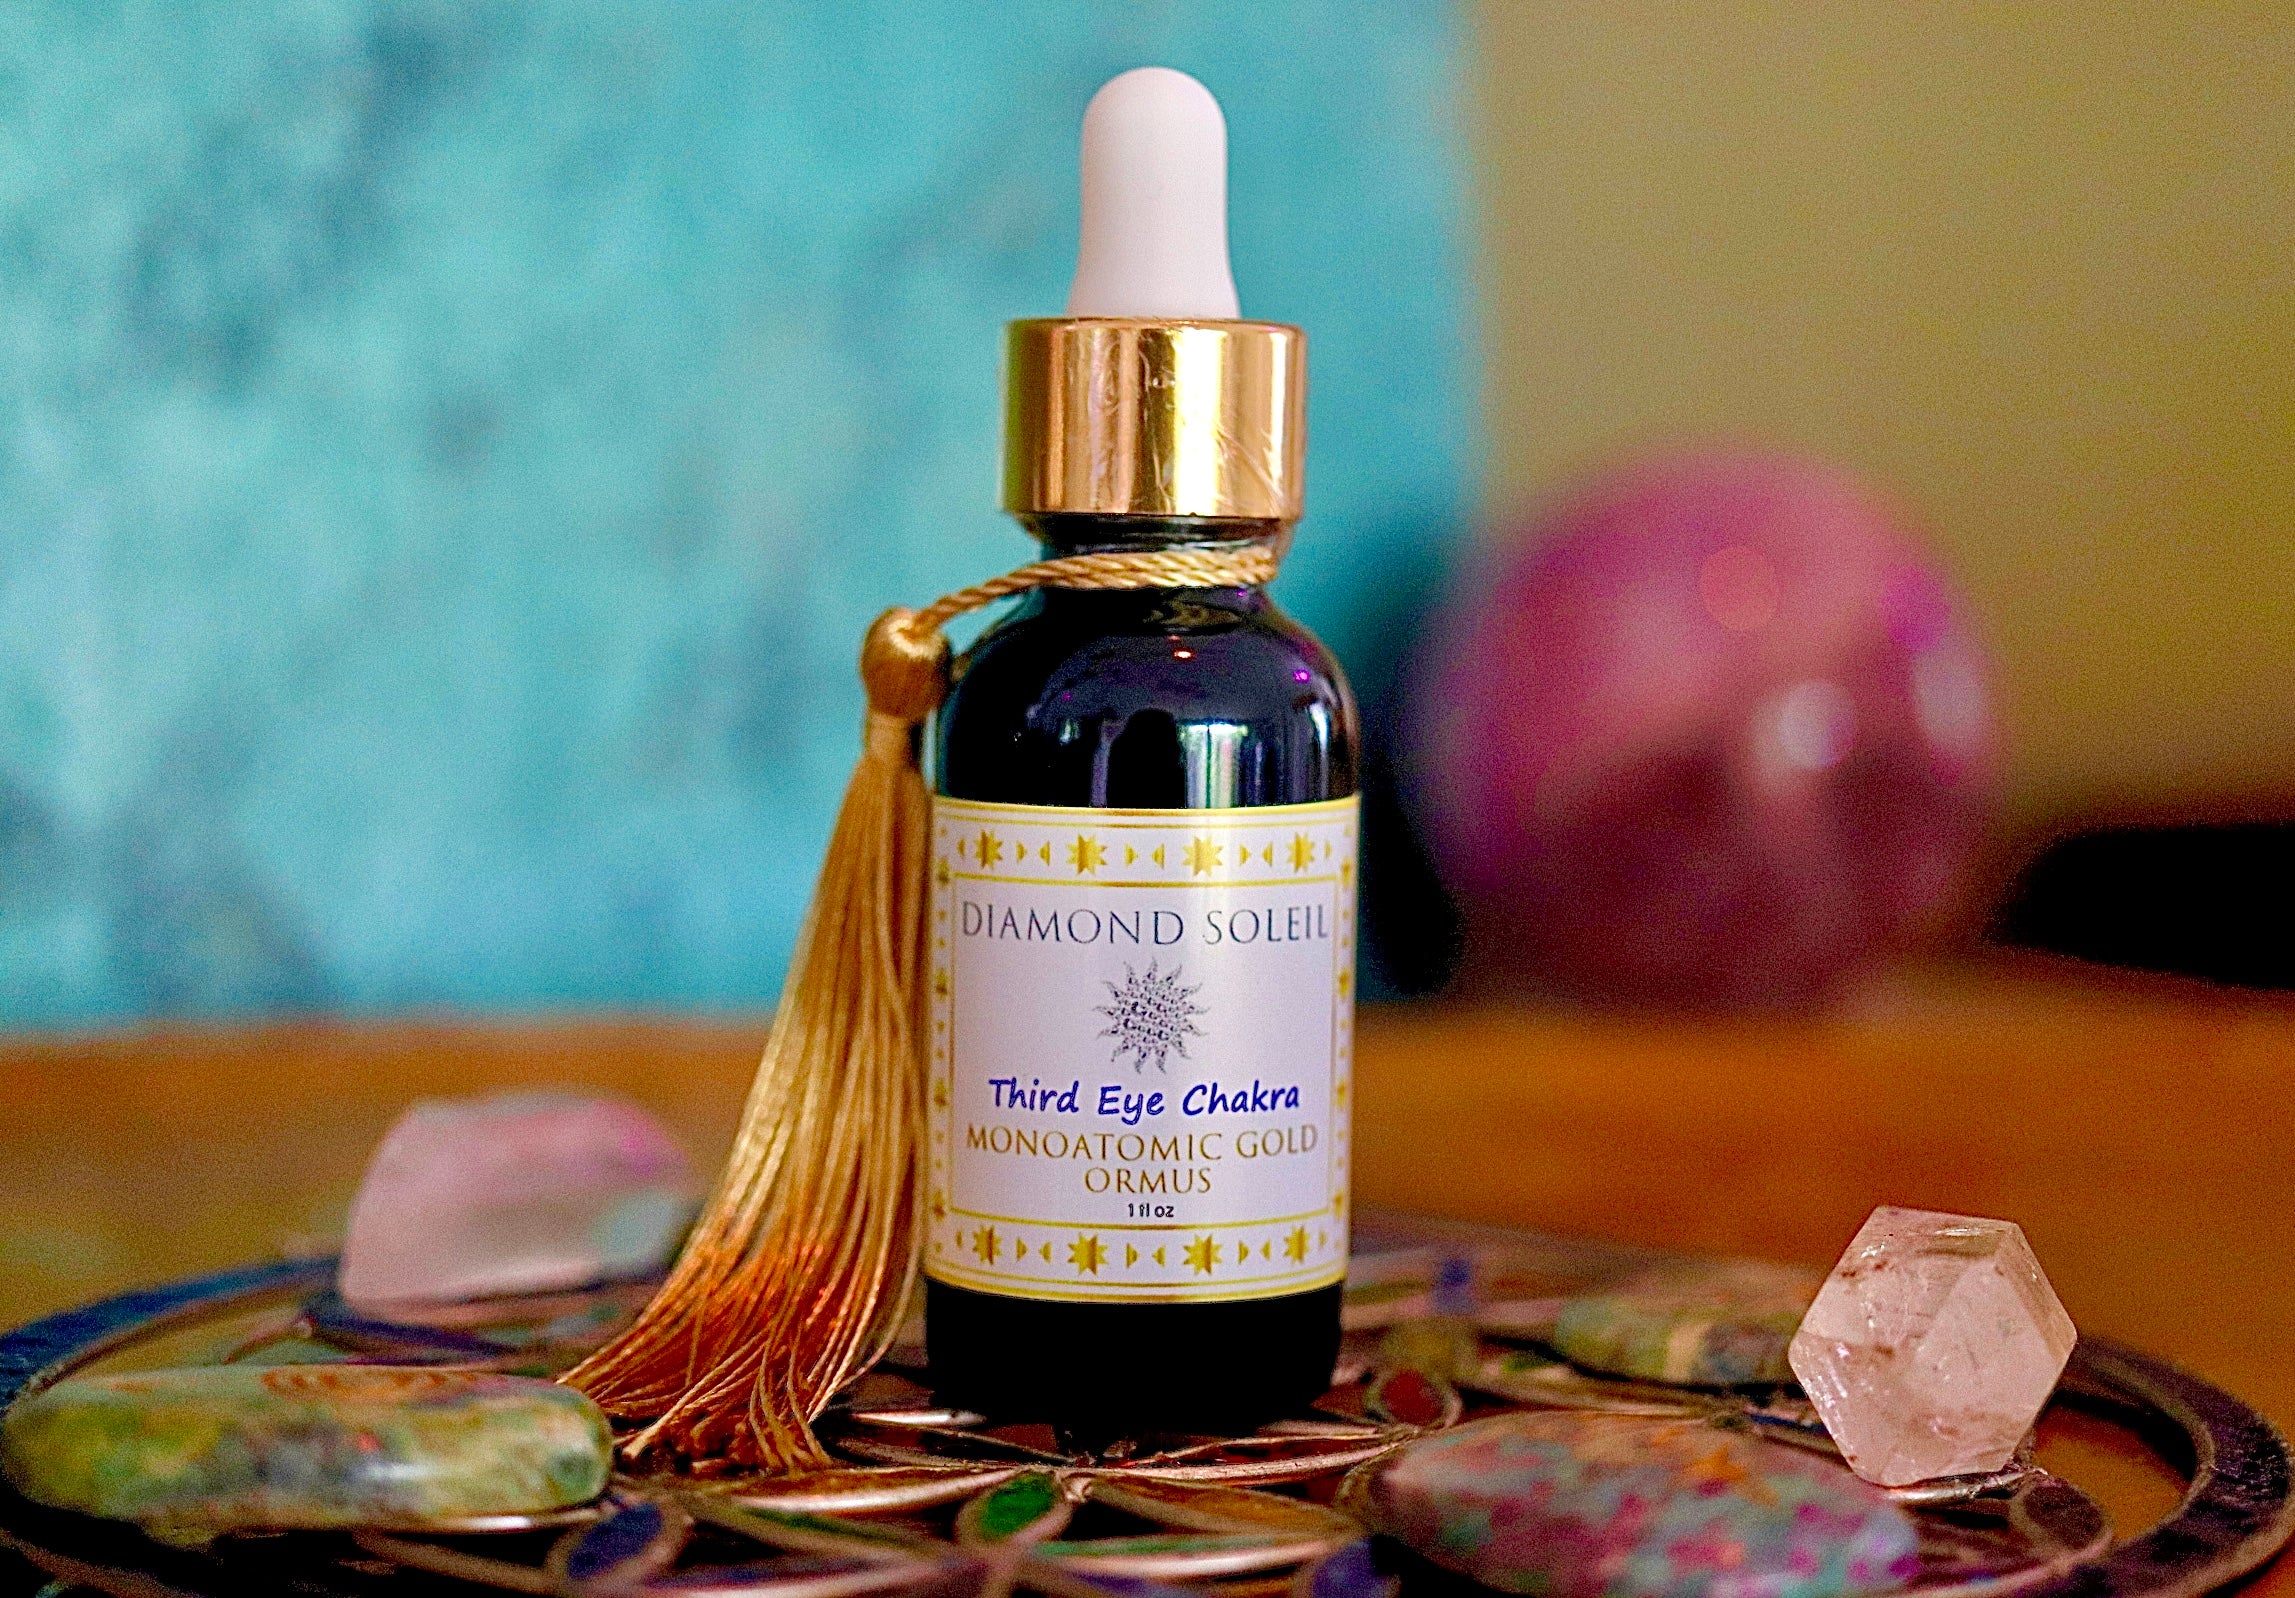 Third Eye Chakra Ormus Elixir - Decalcify Your Pineal Gland and Unlock Intuition